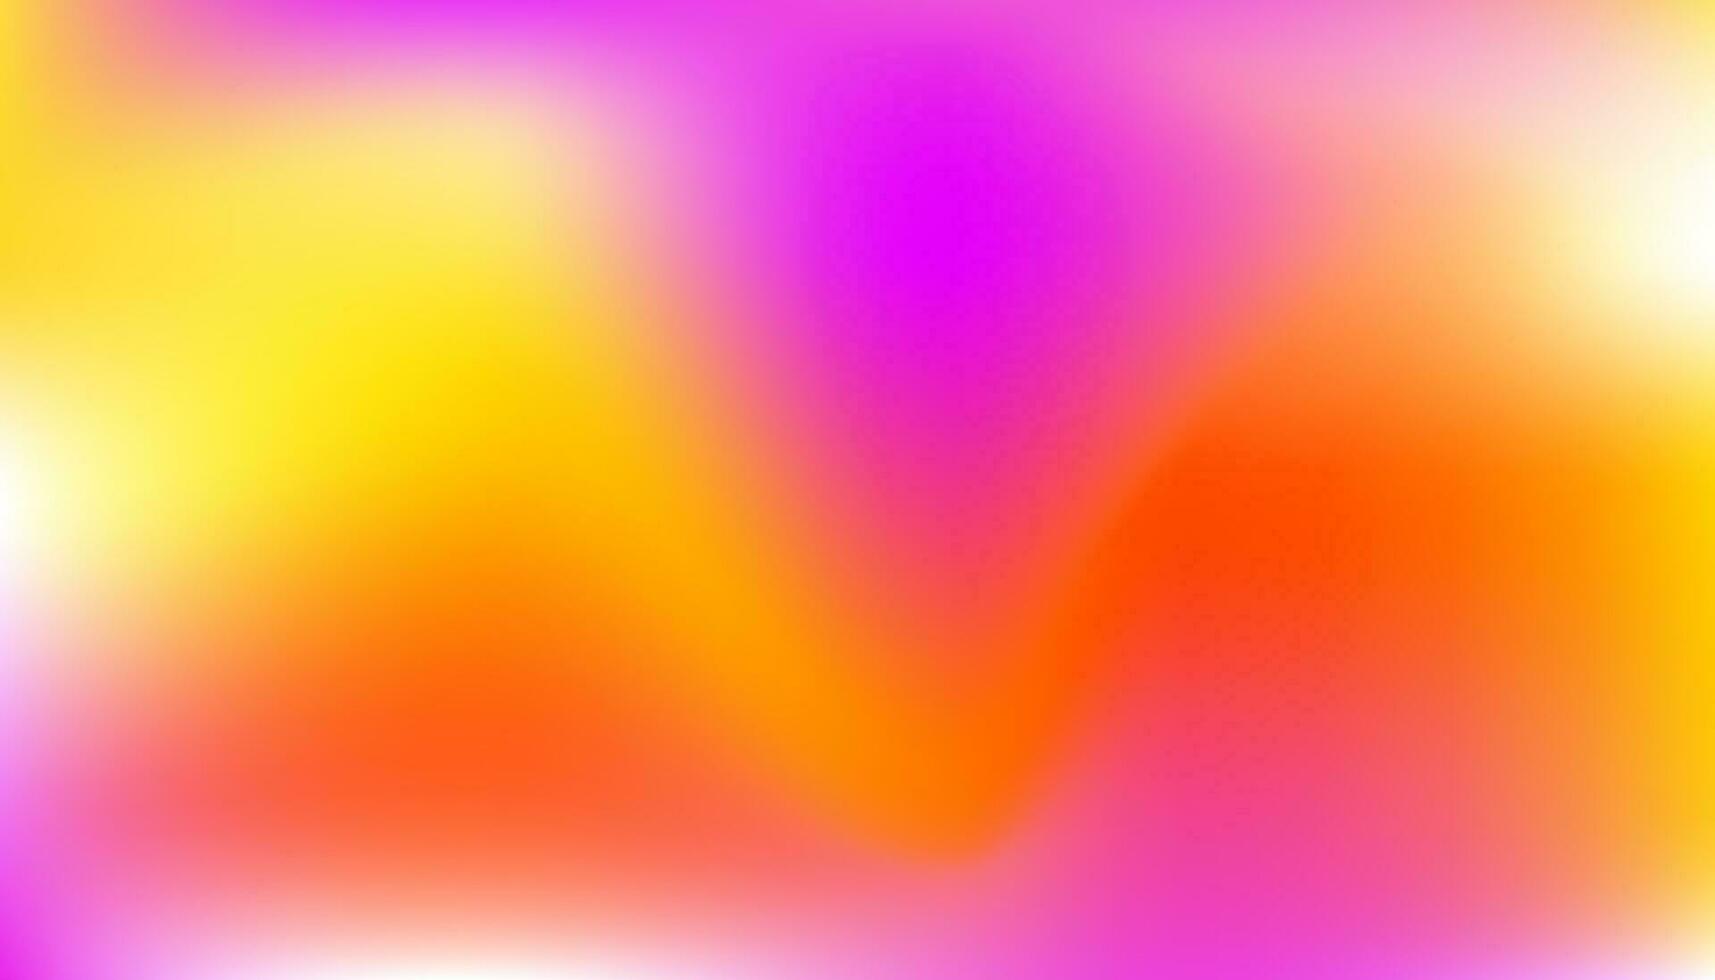 Neon gradient background. Abstract background in yellow, pink and orange colors. vector